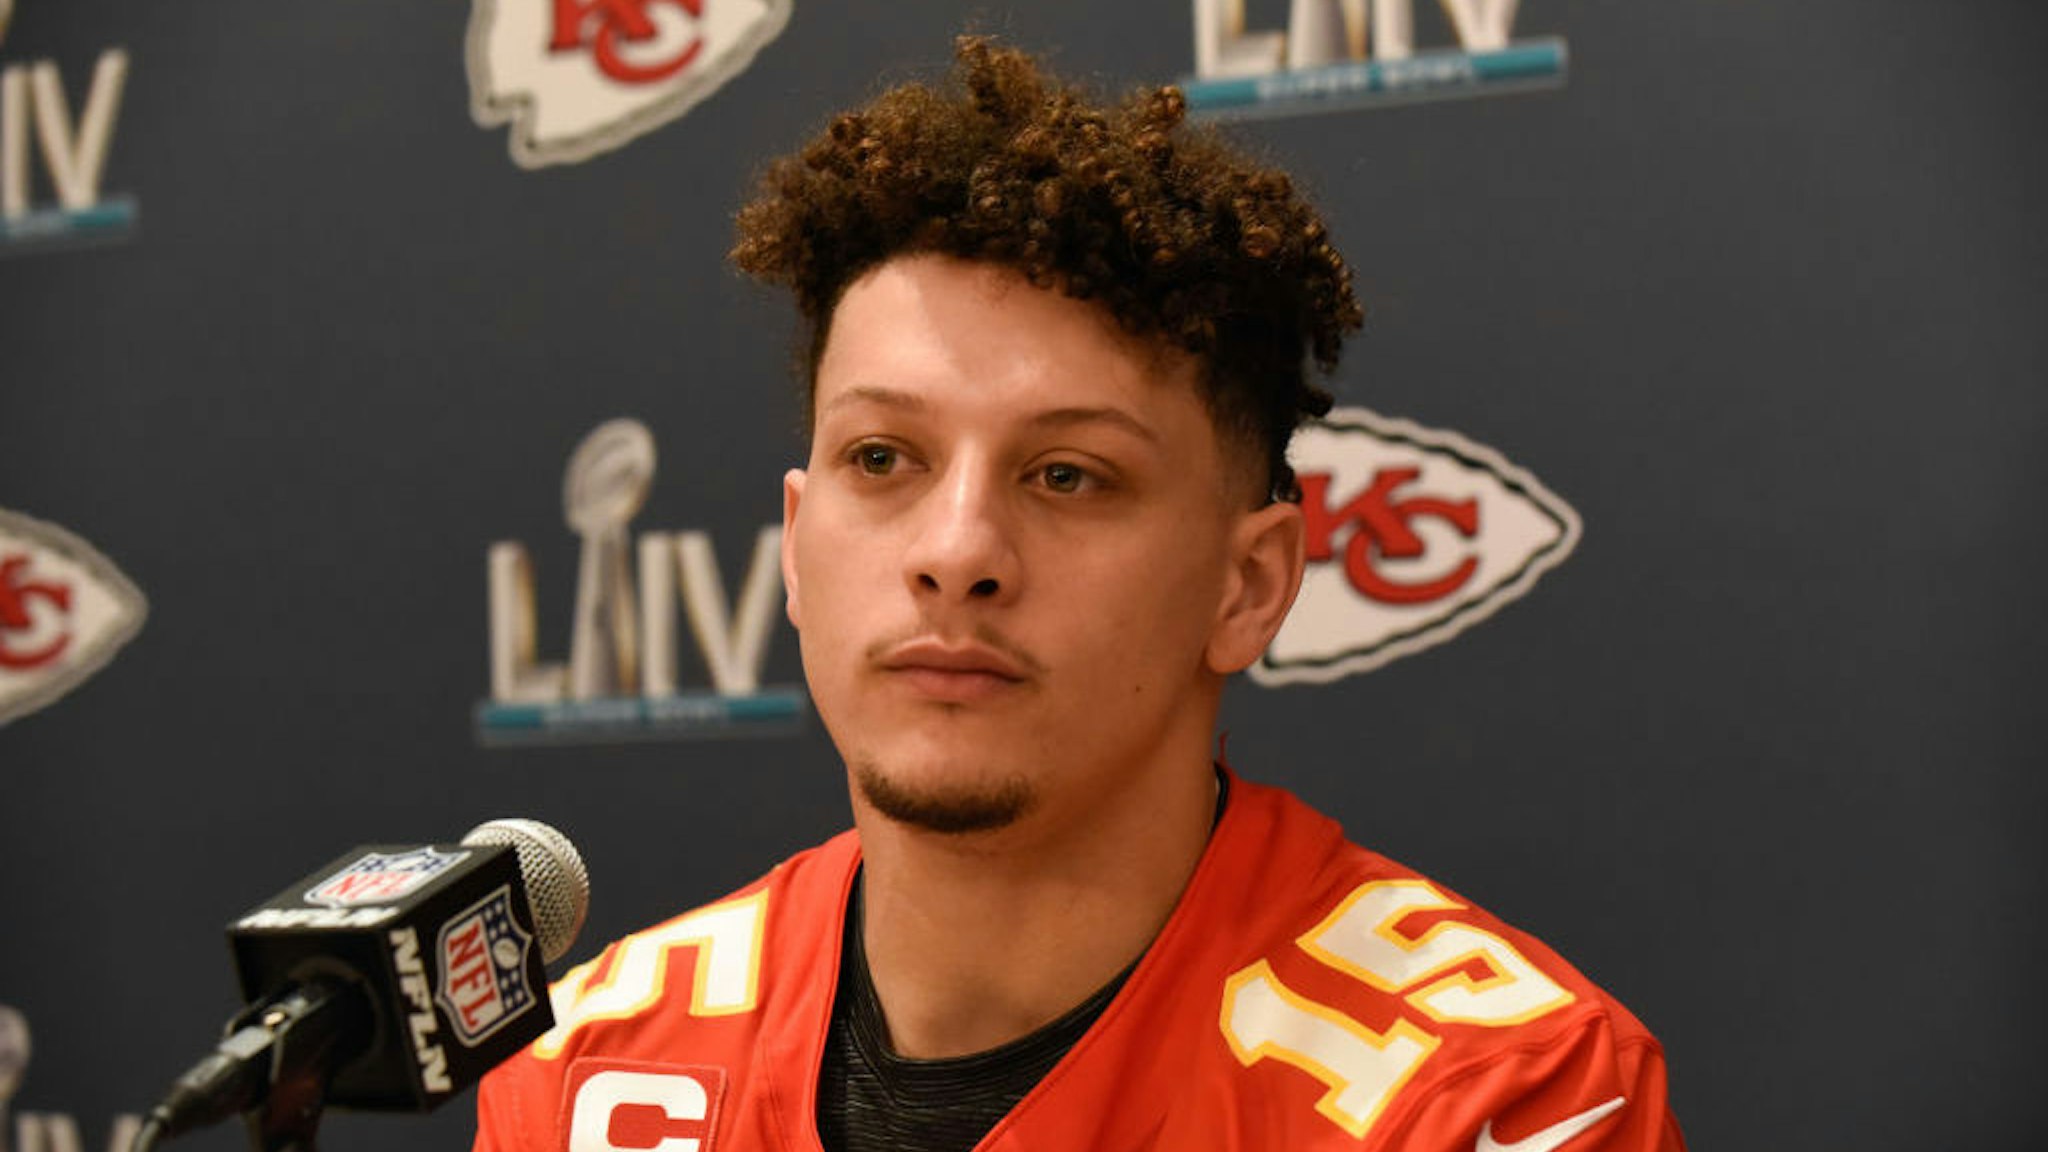 AVENTURA, FL - JANUARY 28: Kansas City Chiefs Quarterback Patrick Mahomes answers questions from the media during the Kansas City Chiefs Super Bowl LIV press conference on January 28, 2020, at JW Mariott Turnberry in Miami, FL. (Photo by Michele Eve Sandberg/Icon Sportswire via Getty Images)